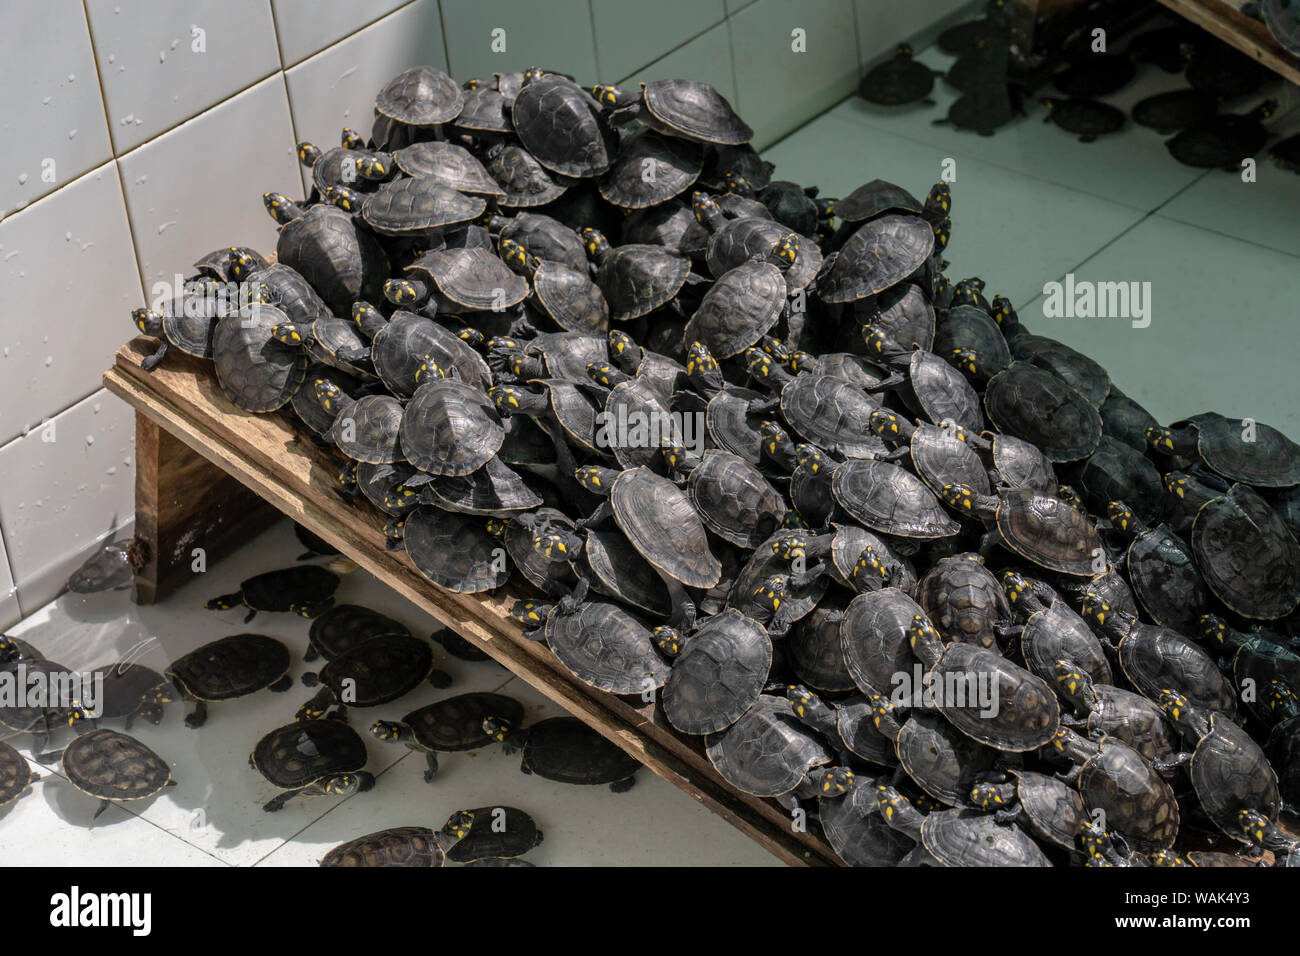 Iquitos, Peru. Yellow-spotted river turtles or yellow-spotted Amazon River turtles being raised at the Rescue and Rehabilitation Center of River Mammals. Stock Photo